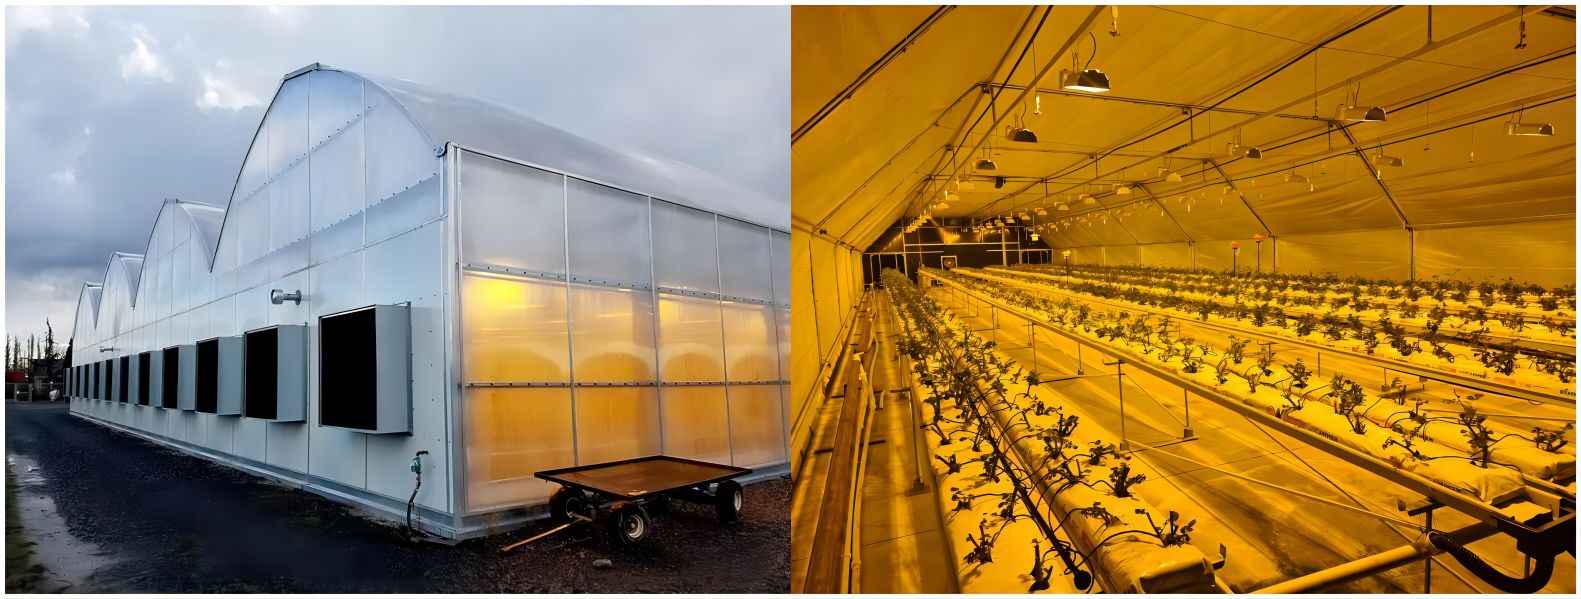 How to use light deprivation greenhouse to grow industrial hemp?